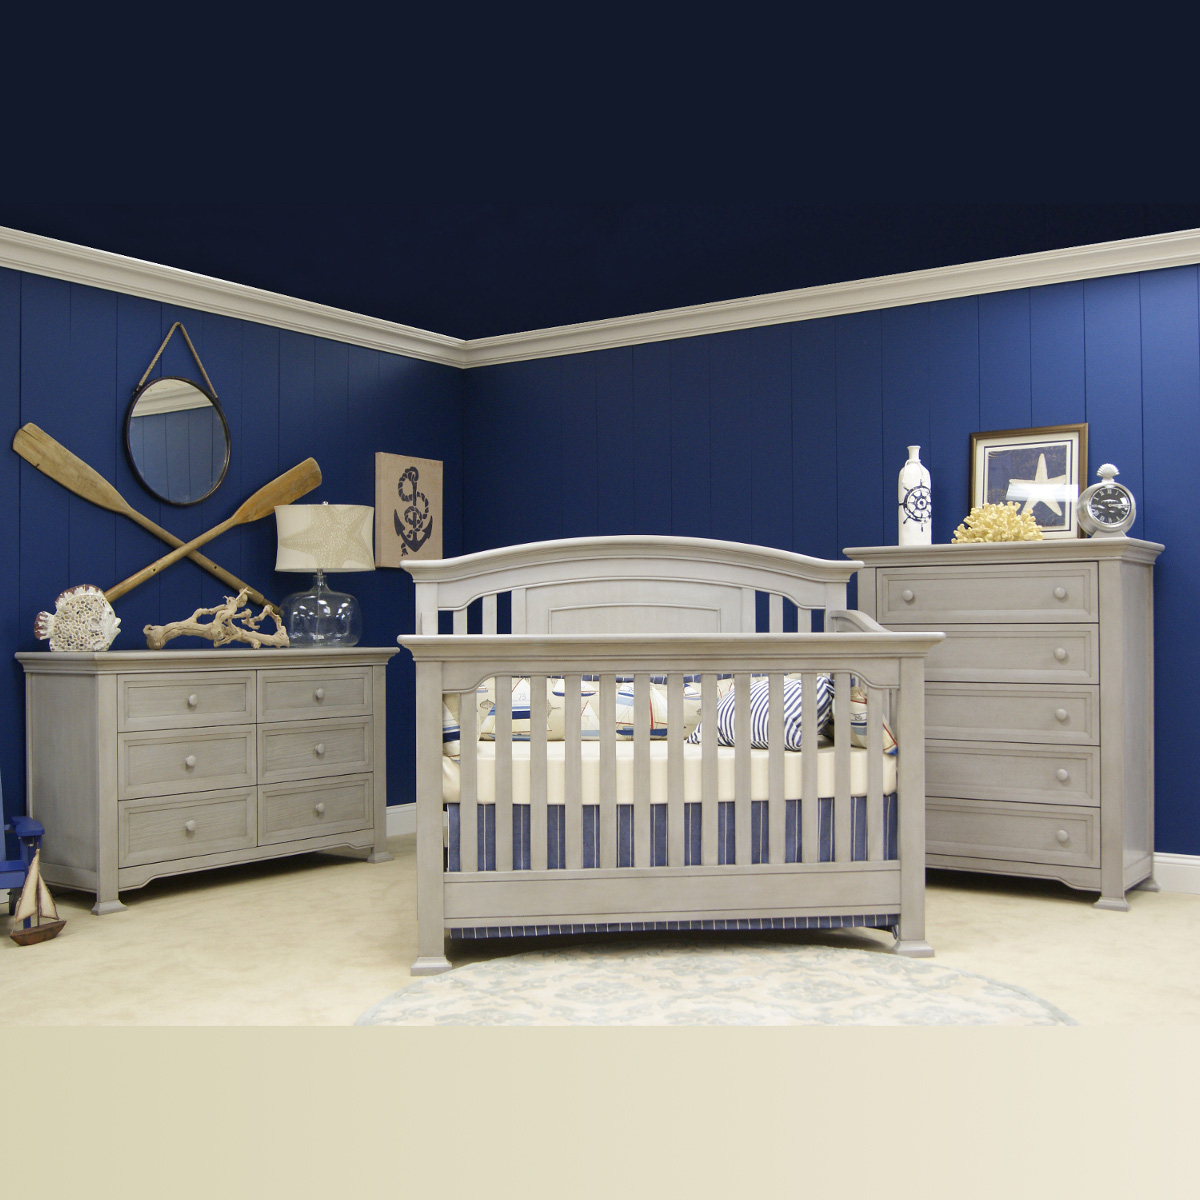 Munire 3 Piece Nursery Set Medford Lifetime Crib 6 Drawer Double Dresser And 5 Drawer Chest In Gray pertaining to size 1200 X 1200